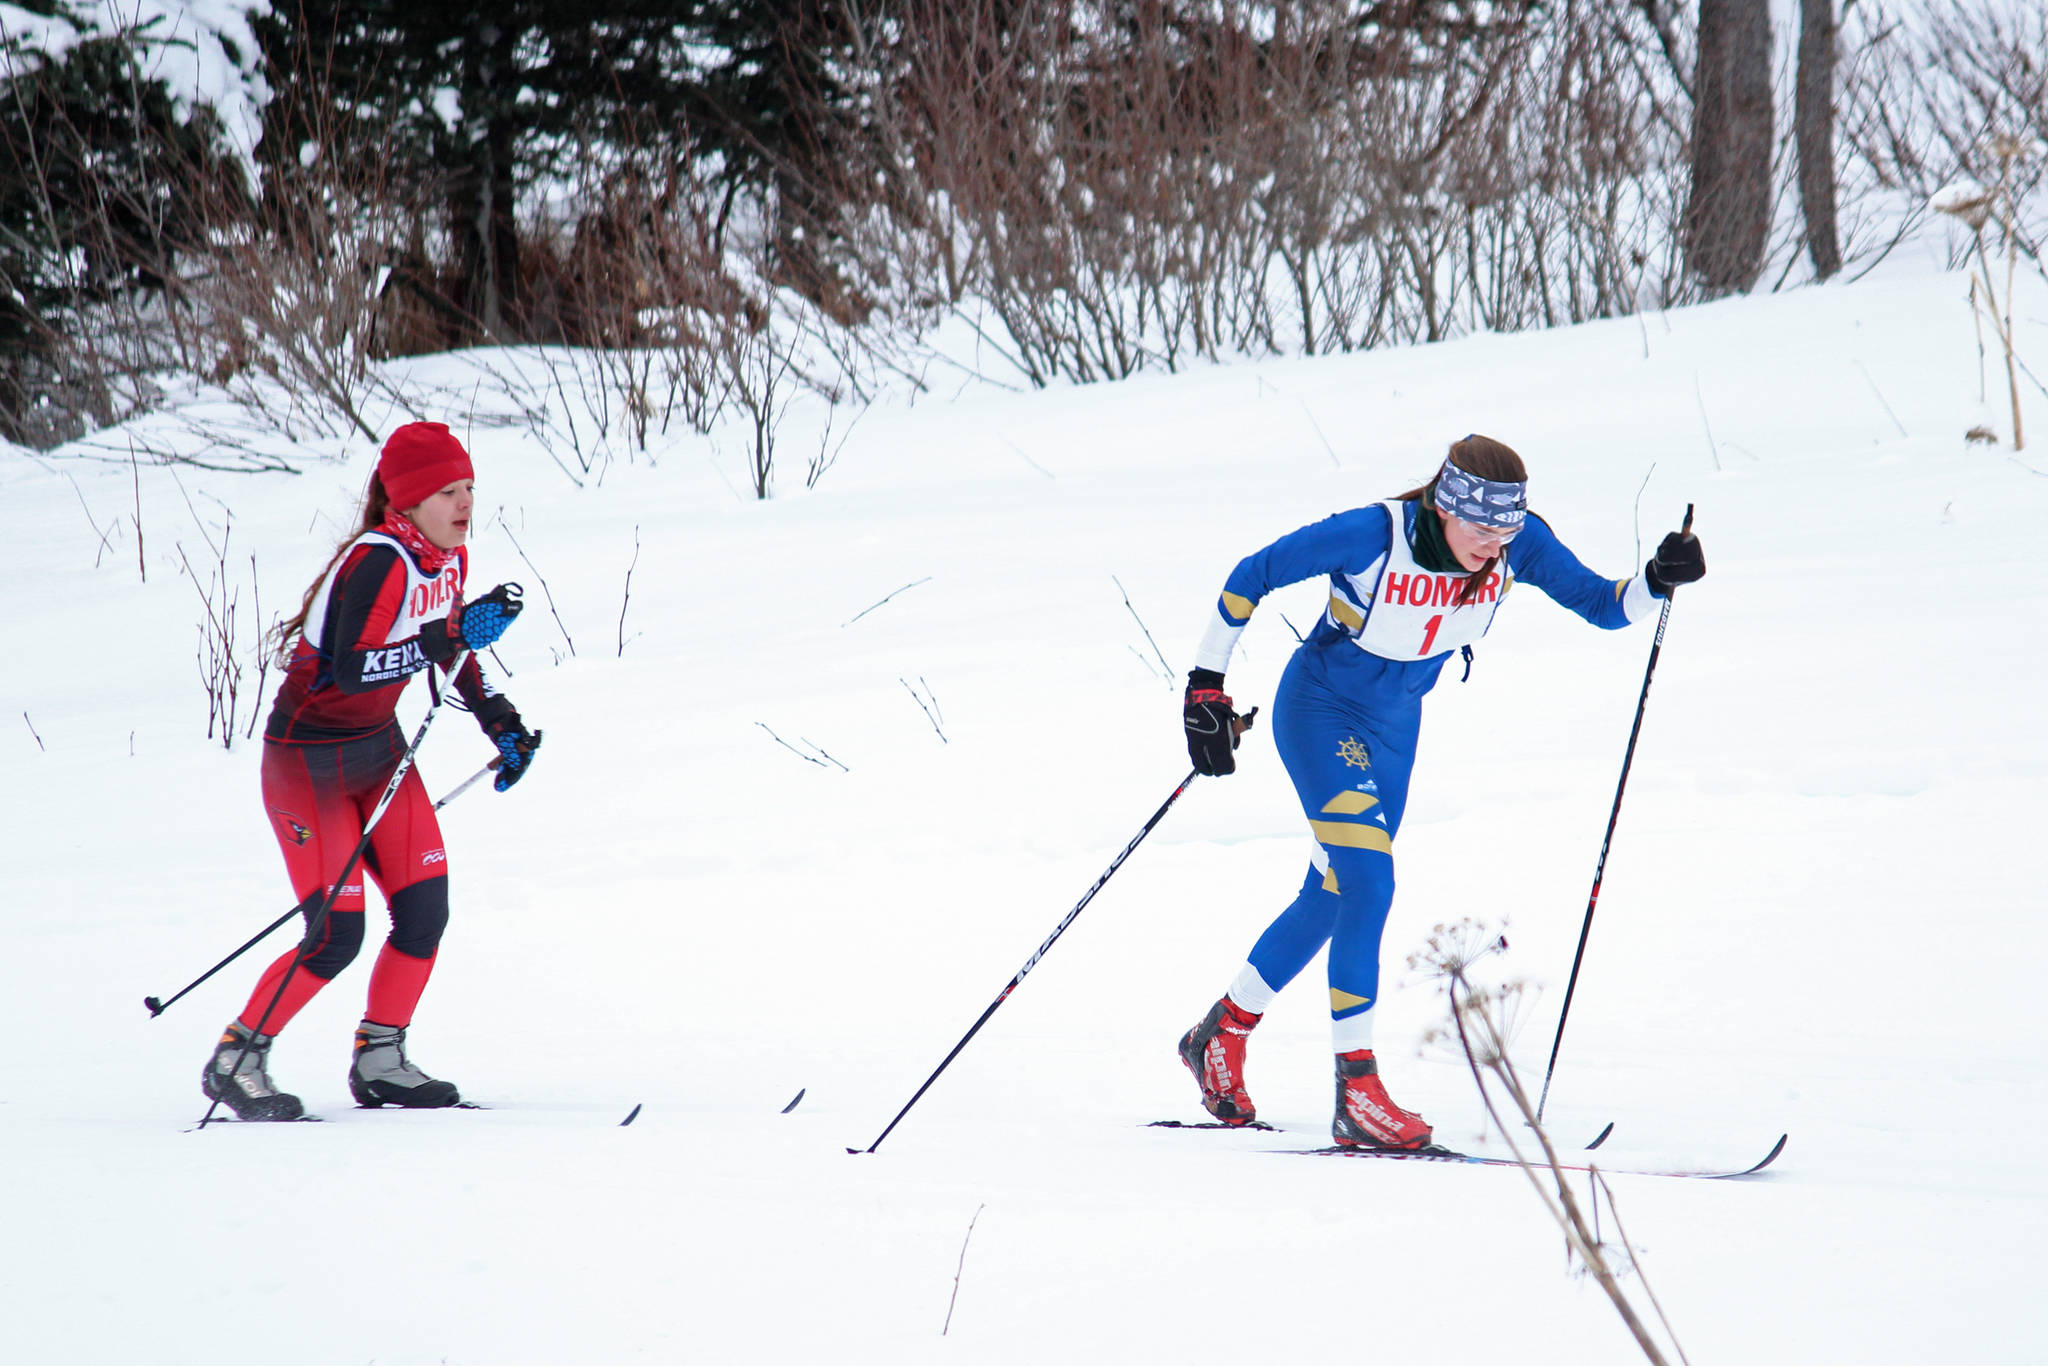 Homer’s Autumn Daigle pulls ahead of Kenai’s Maria Salzetti during the varsity girls’ classic cross-country ski race Friday, Feb. 1, 2019 at the Lookout Mountain Trails near Homer, Alaska. Salzetti had maintained the lead for the first portion of the race, and the two skiers battled for first throughout. (Photo by Megan Pacer/Homer News)